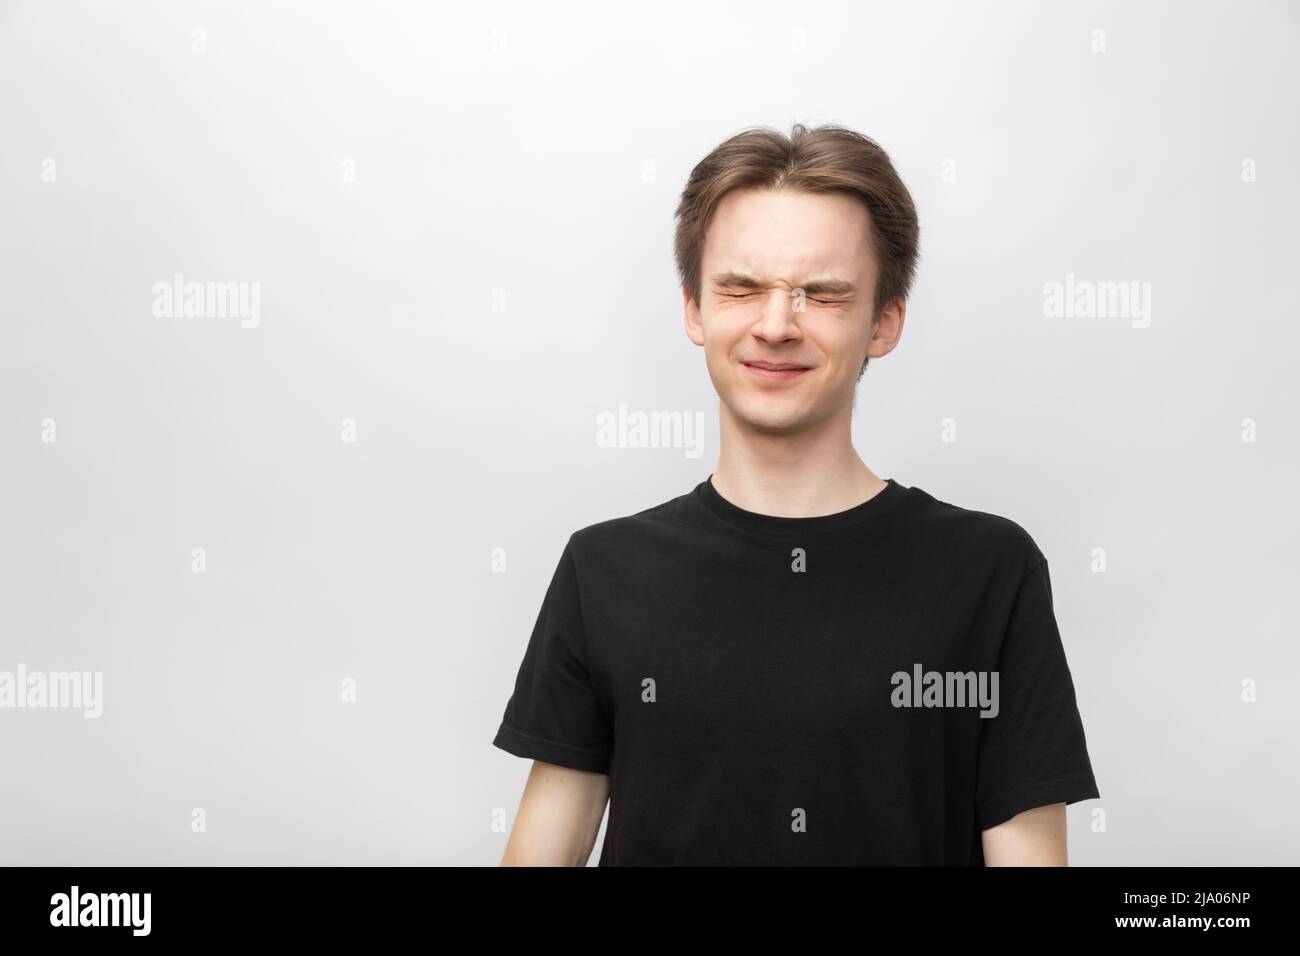 Portrait of annoyed young man wearing black tshirt disturbed from loud awful sound or noise tightly narrowing his eyes. Studio shot on gray background Stock Photo